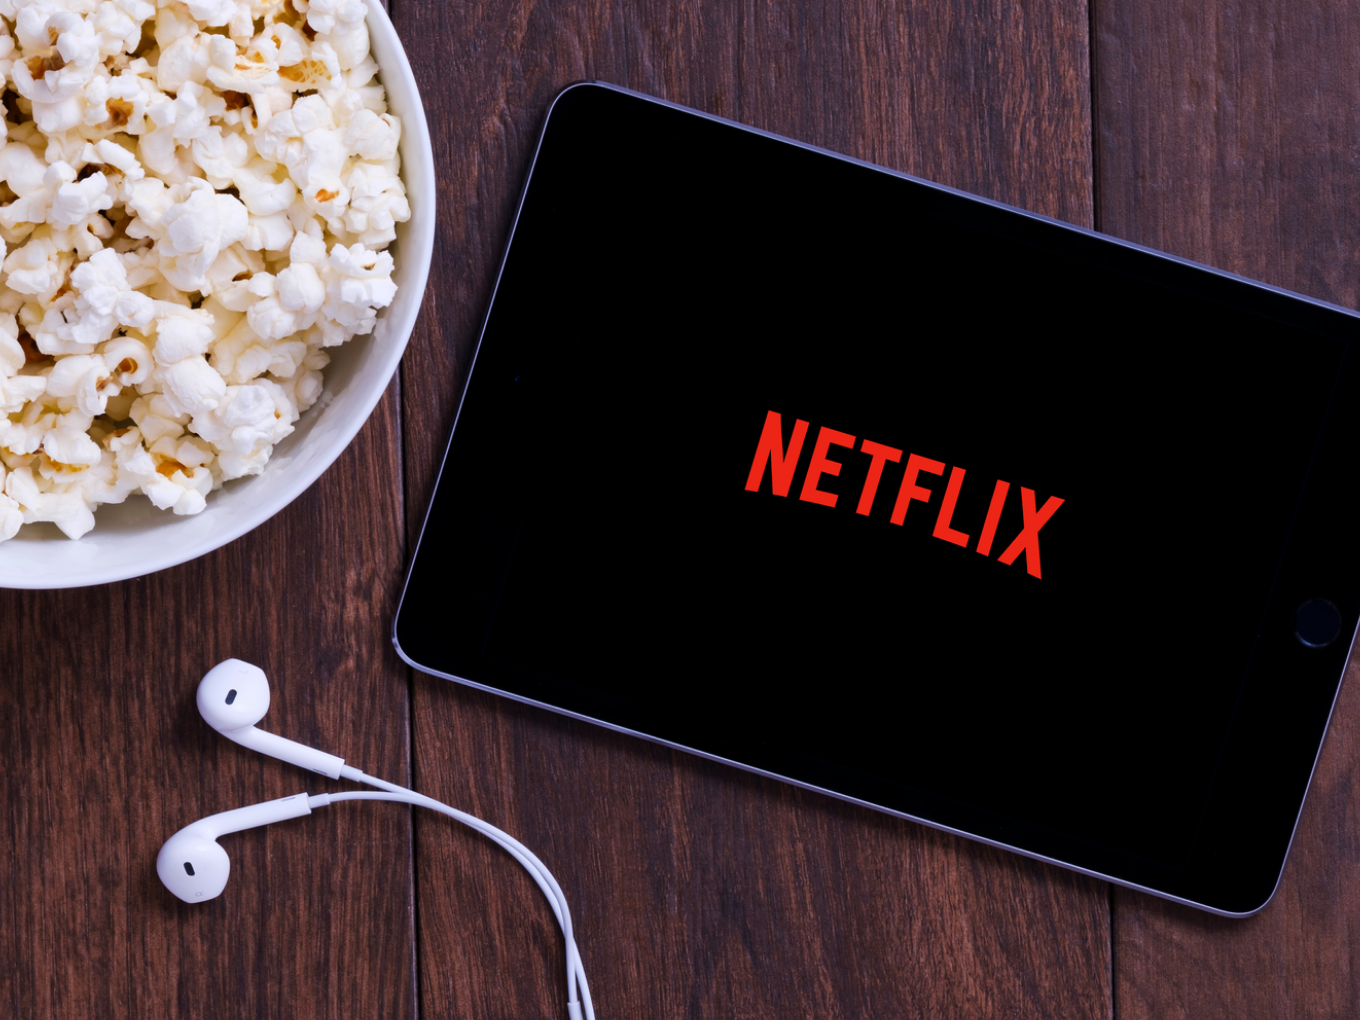 Netflix Says 'Nice Growth' In India, Has Price Reduction Strategy Paid Off?